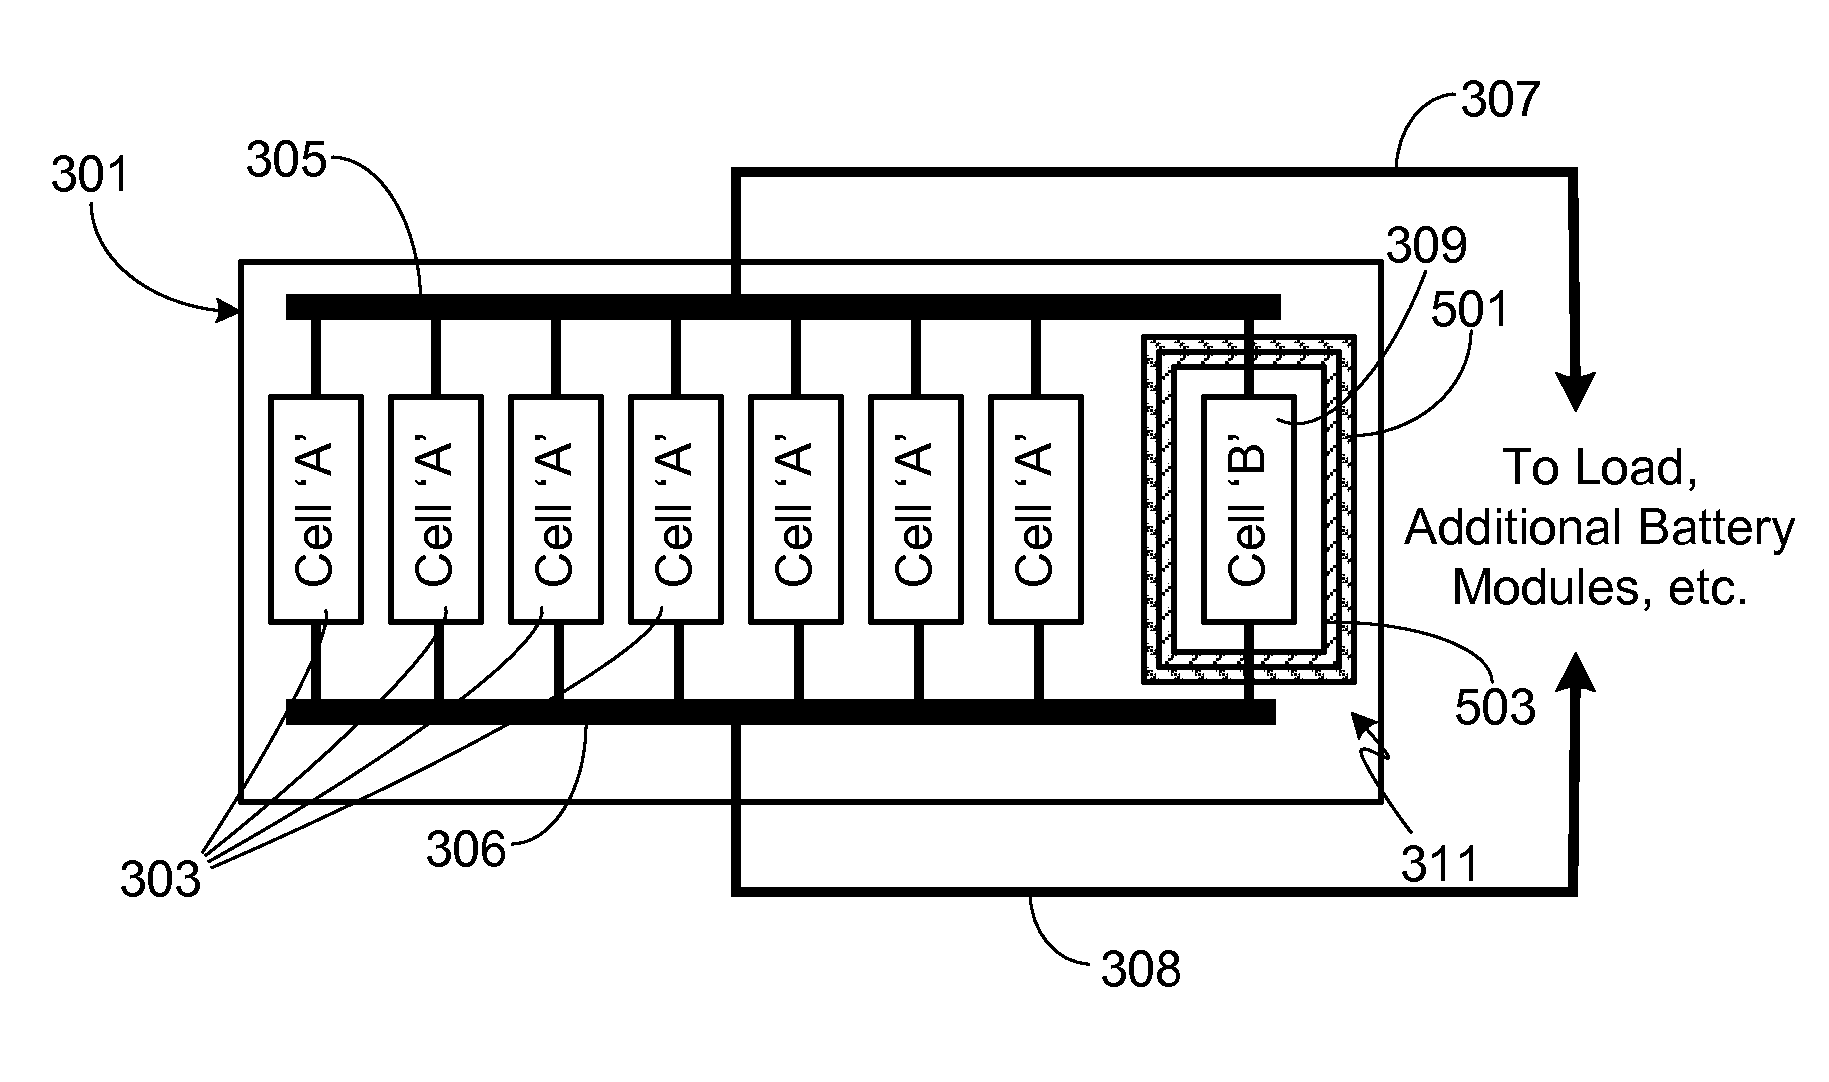 Battery Pack Configuration to Reduce Hazards Associated with Internal Short Circuits